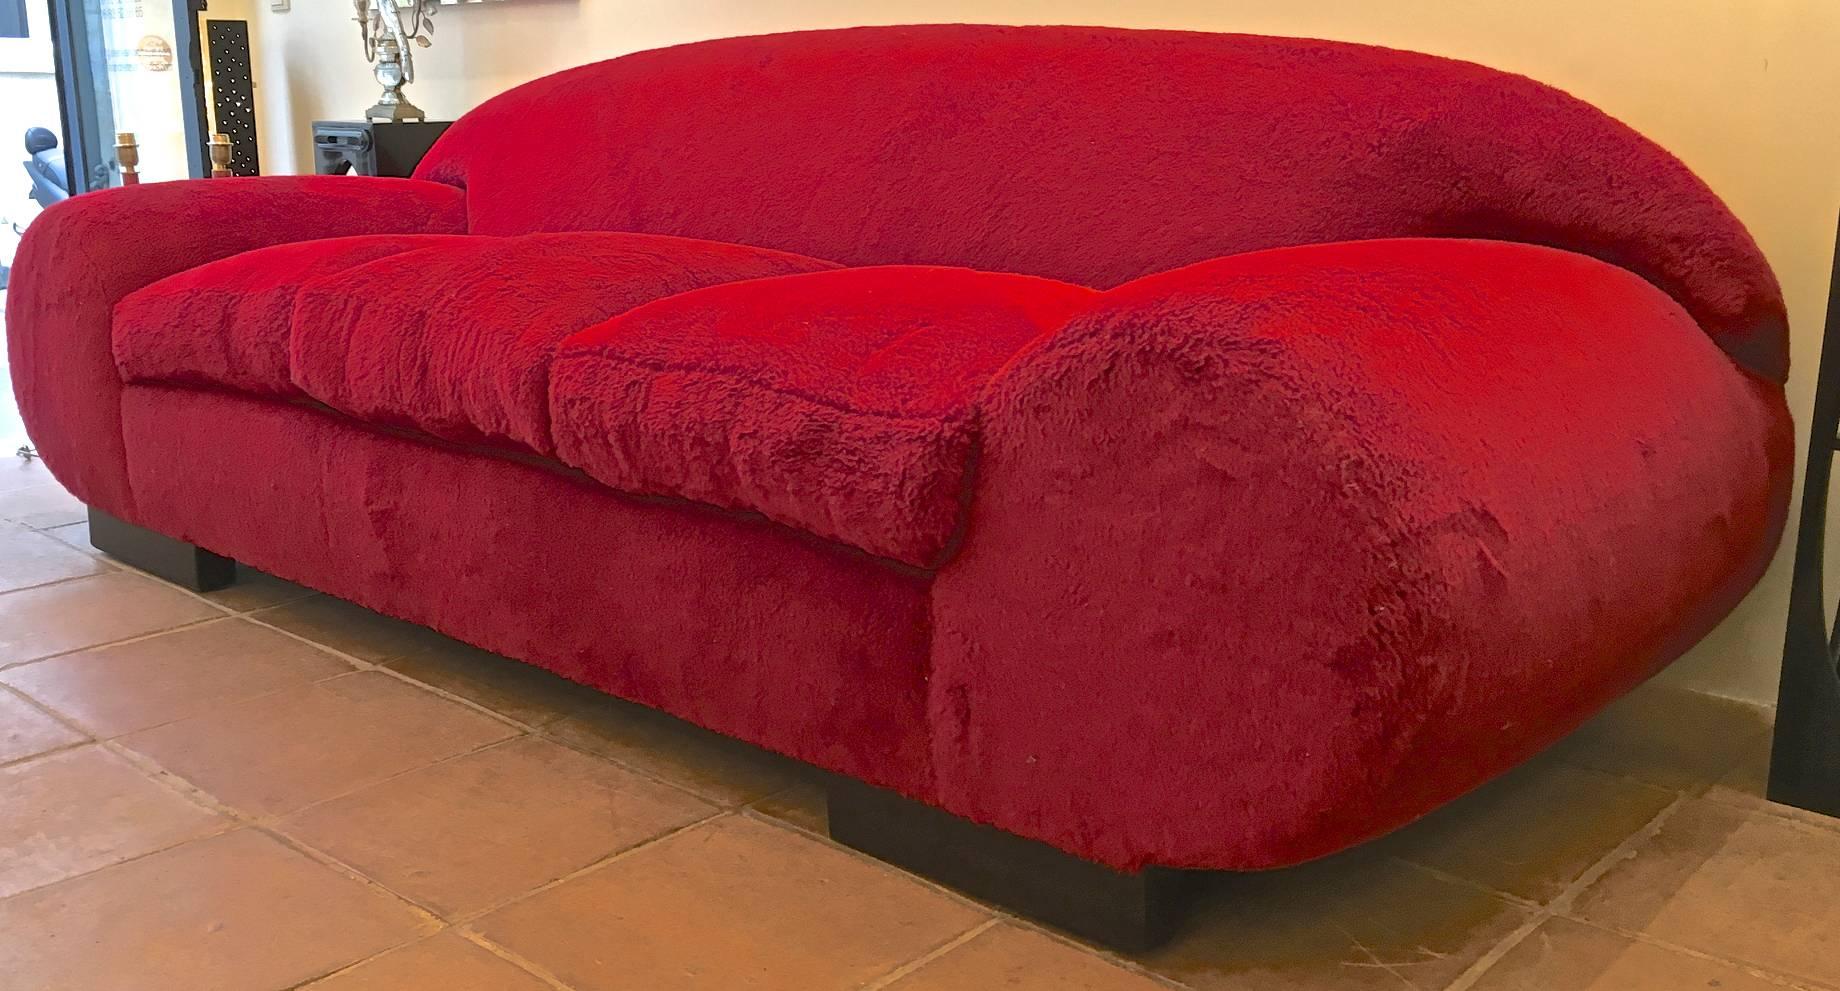 Jean Royère for Maison Gouffé rarest mammoth big documented red early produced couch newly covered in wool faux fur documented in:
Decor d'aujourd'hui n31 in 1938.
Ensembles mobiliers vol 4 1939.
 